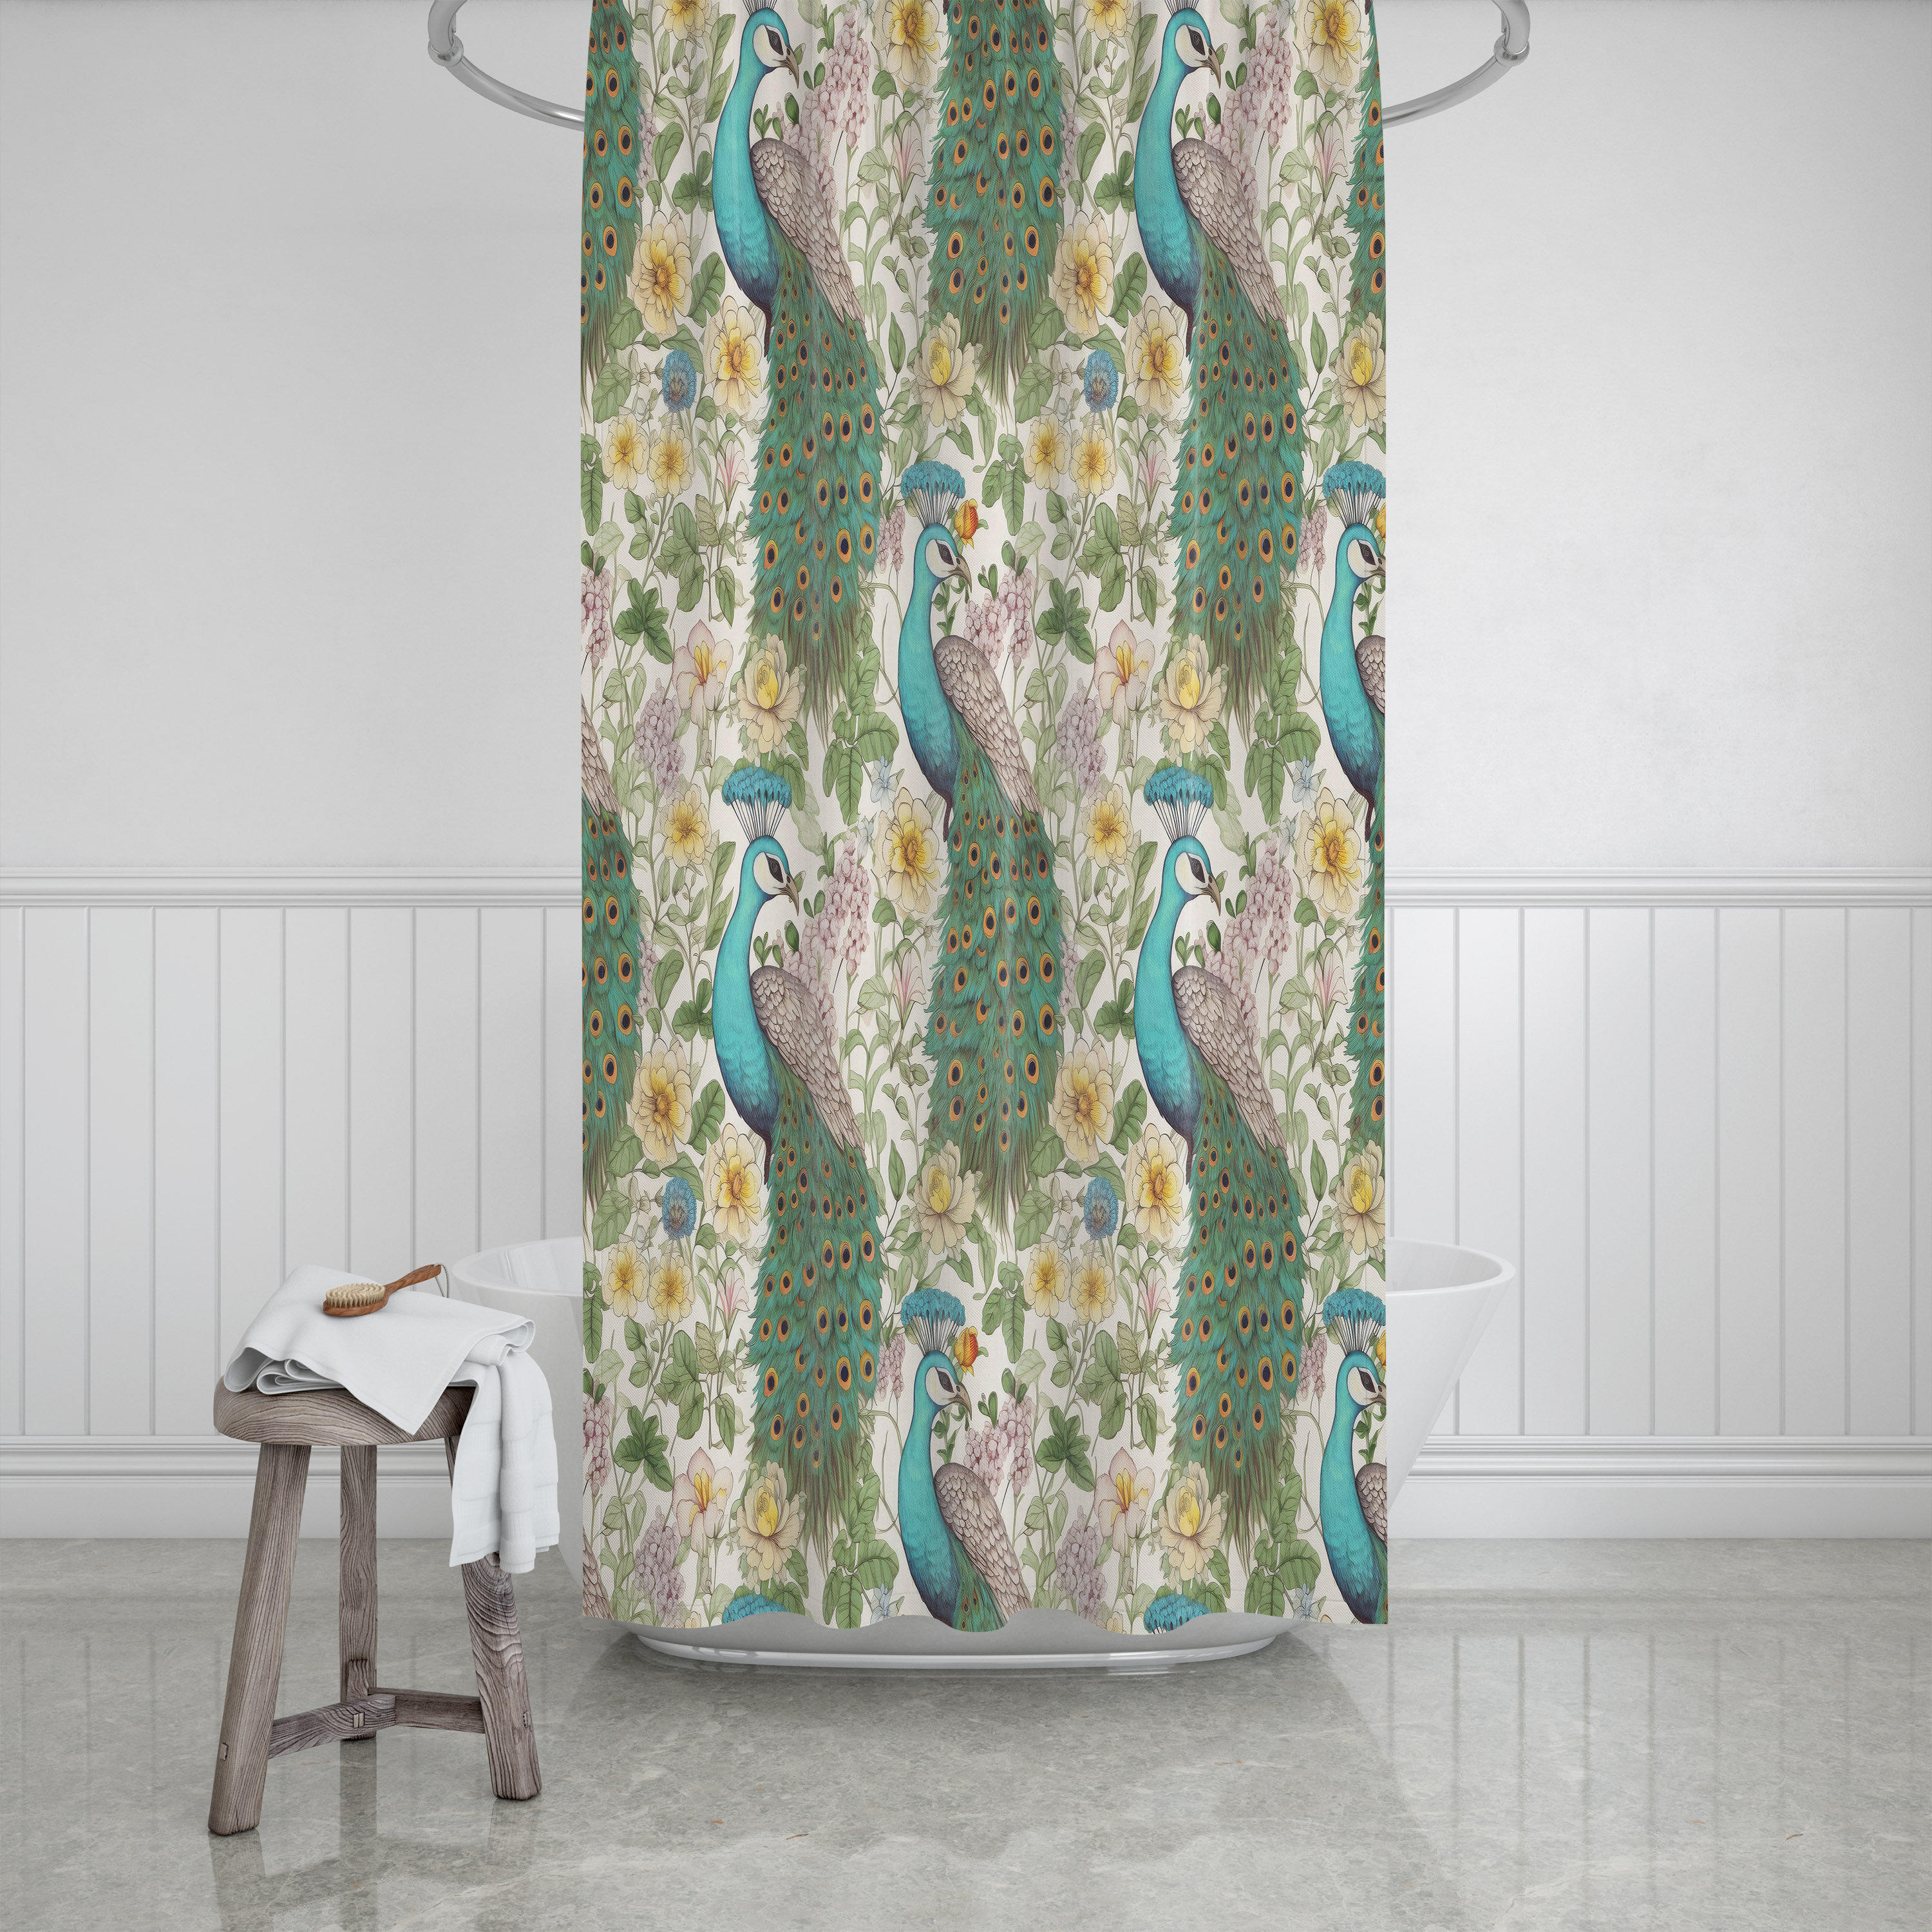 Aasir Floral Shower Curtain East Urban Home Size: 72 H x 70 W